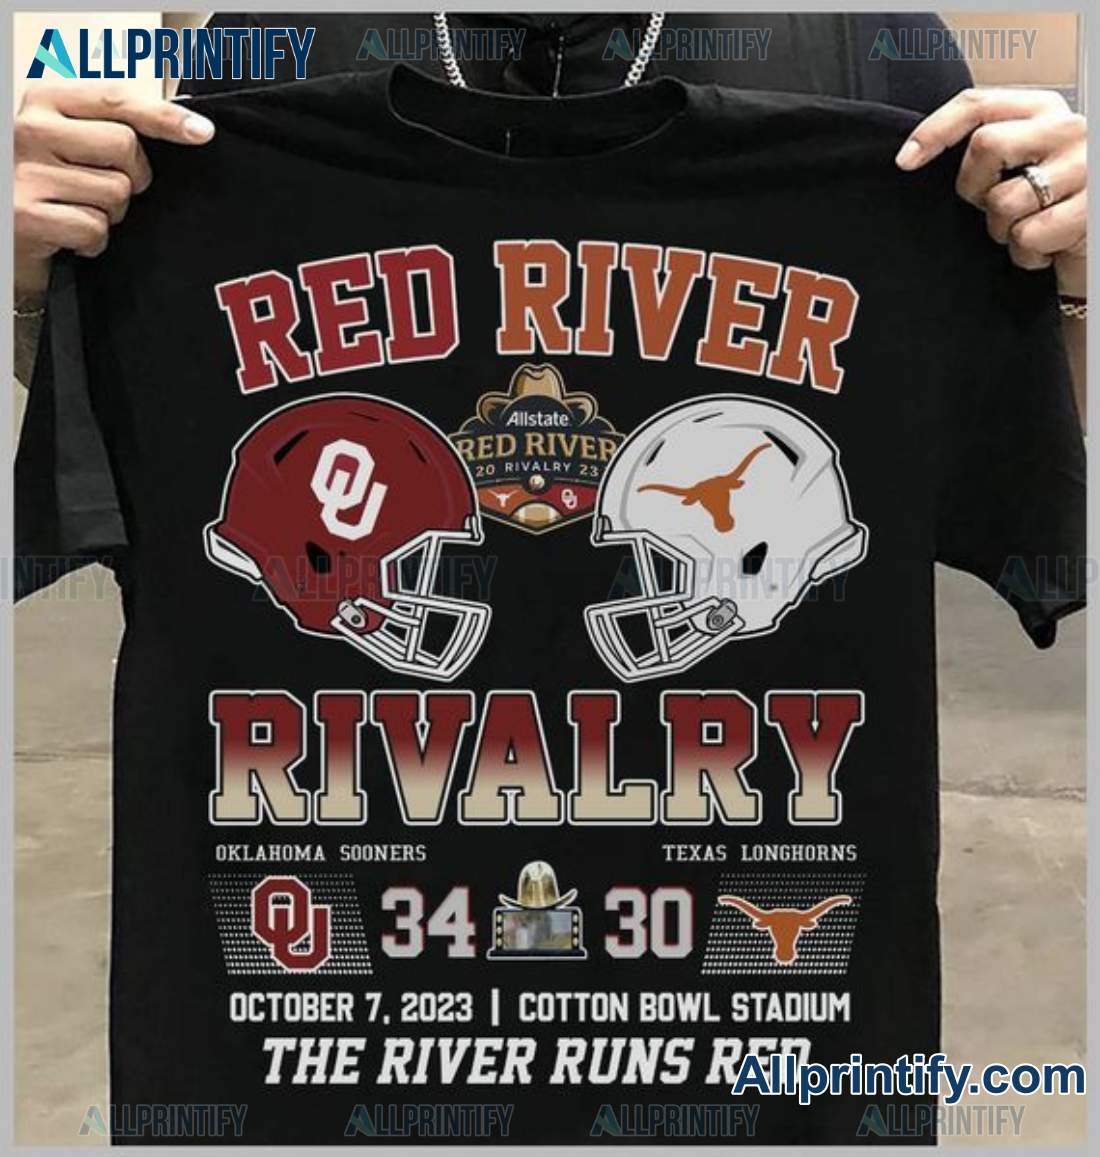 Red River Rivalry Oklahoma Sooners Texas Longhorns 34-30 The River Runs Red Shirt